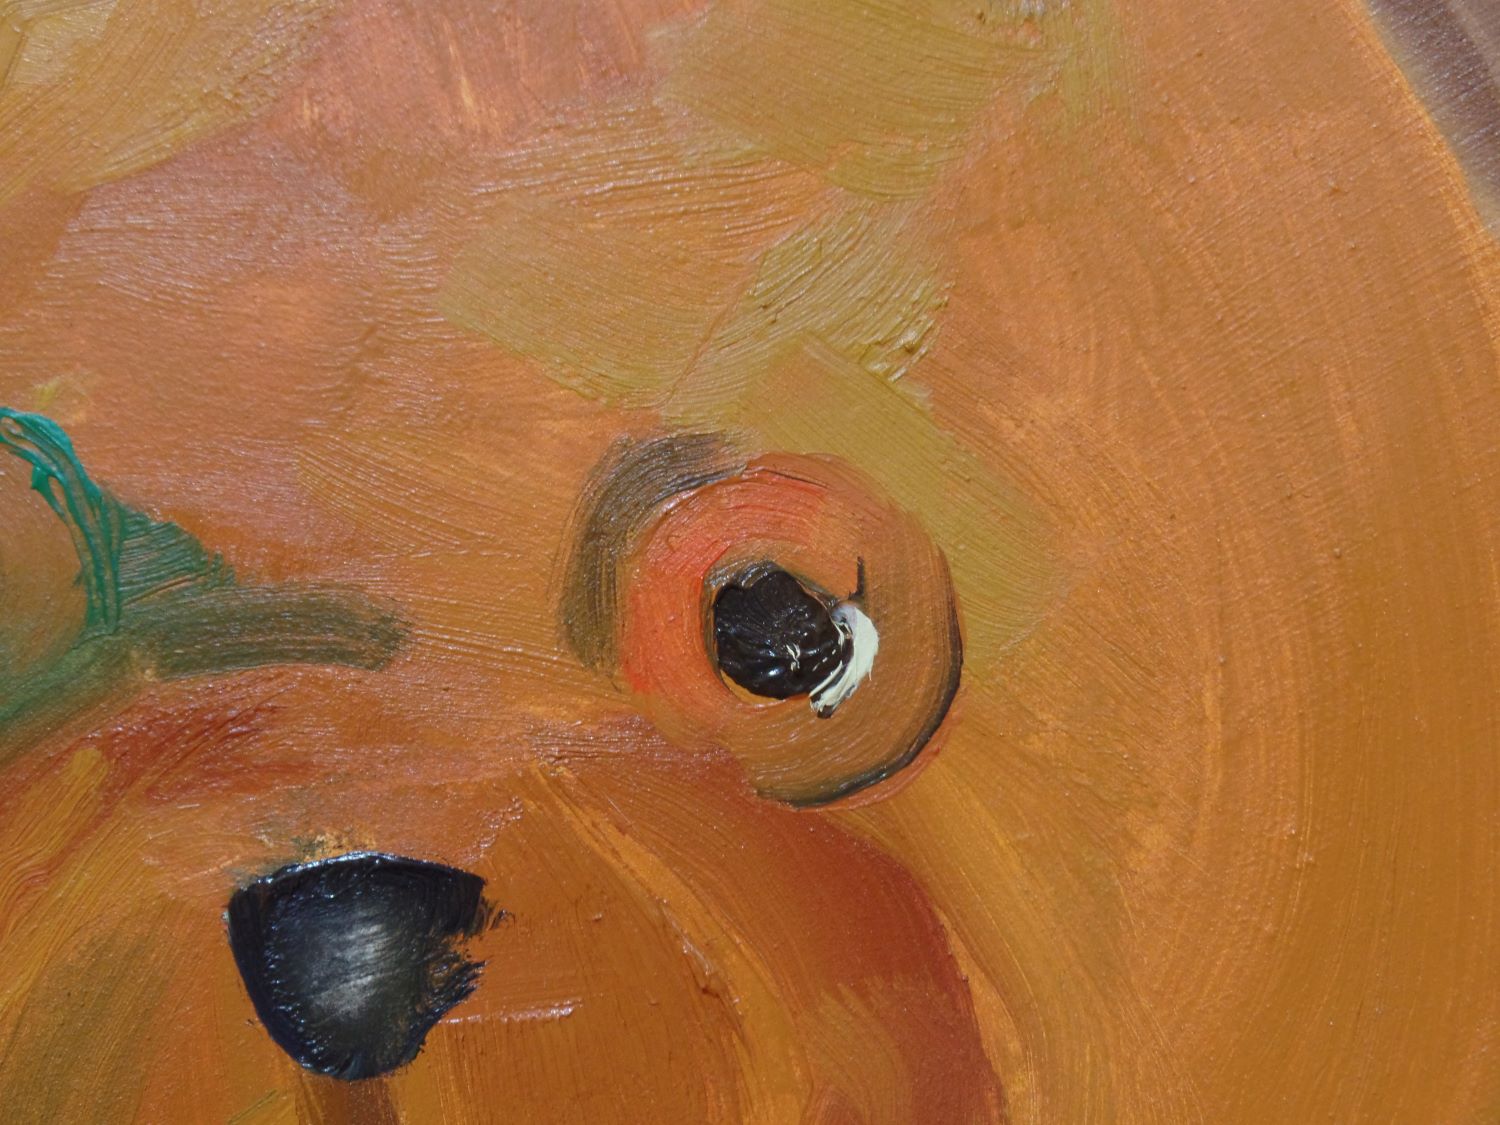 Close up of a painting of a stuff animal's eye.